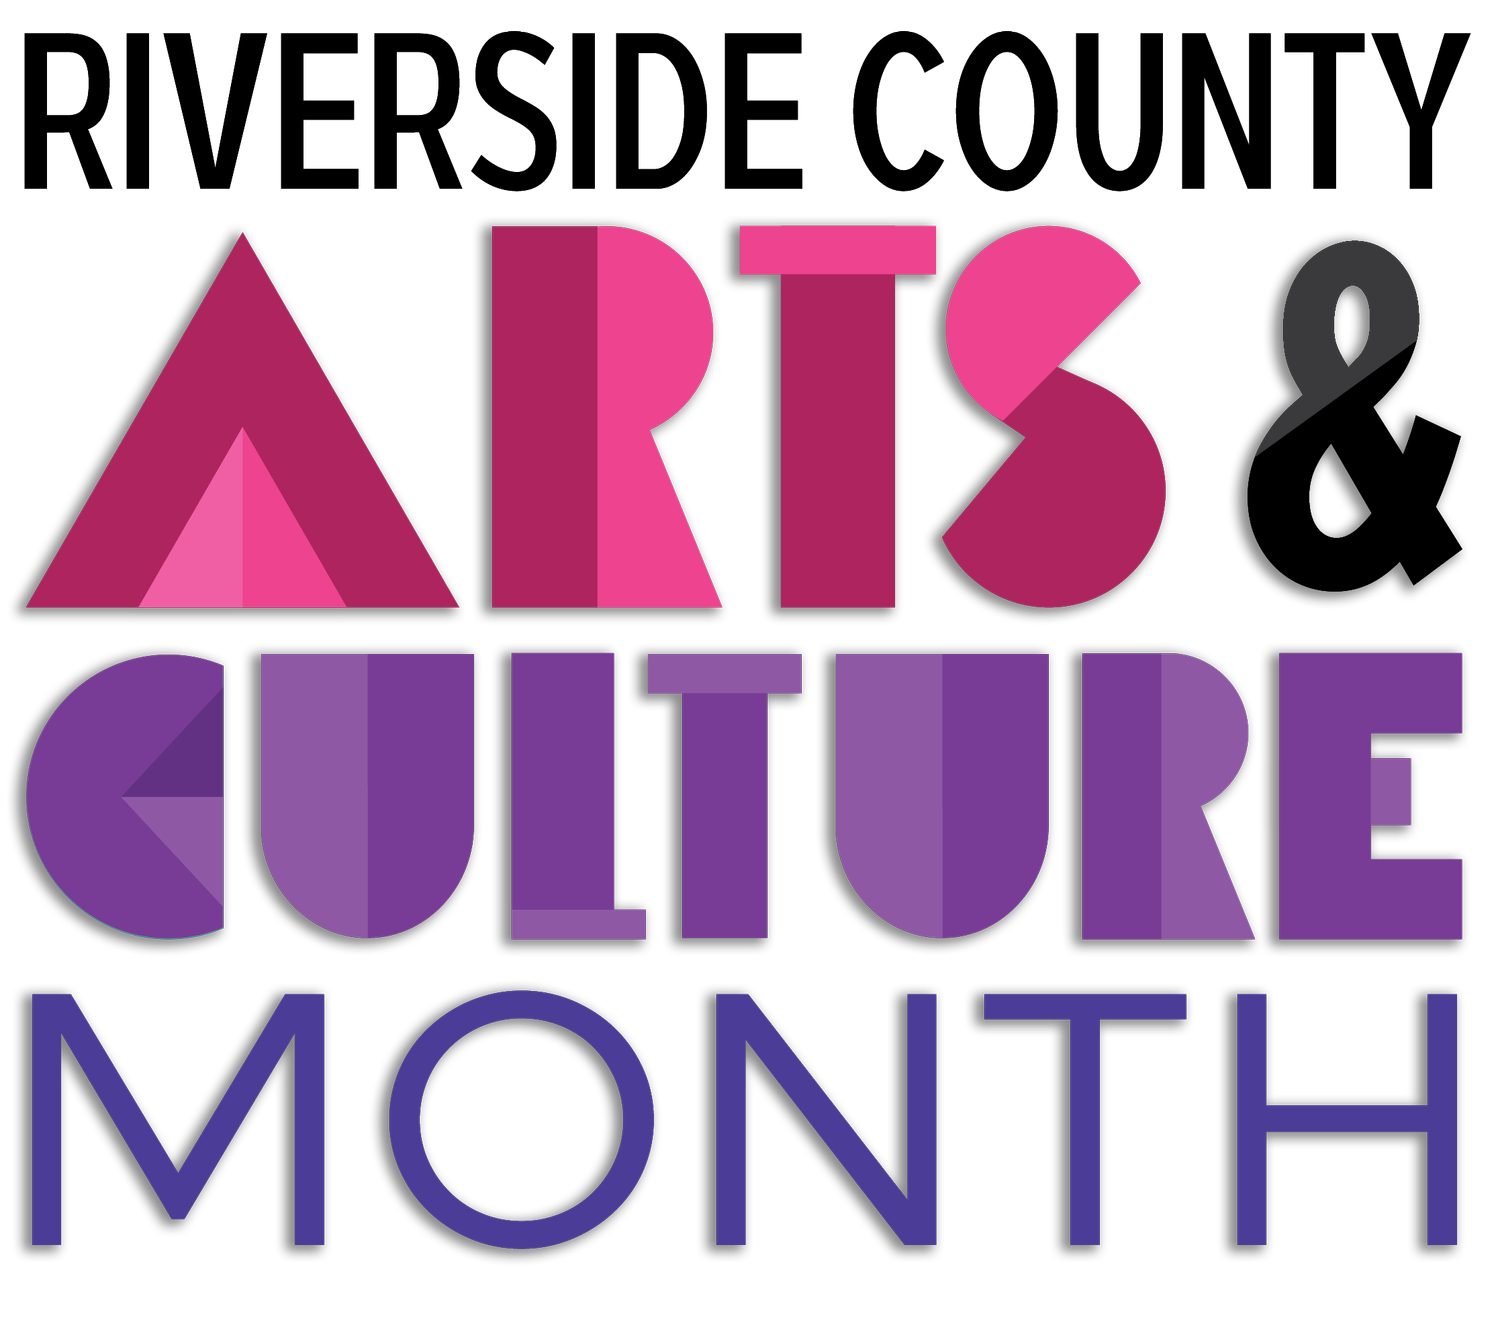 Riverside County Arts and Culture Month